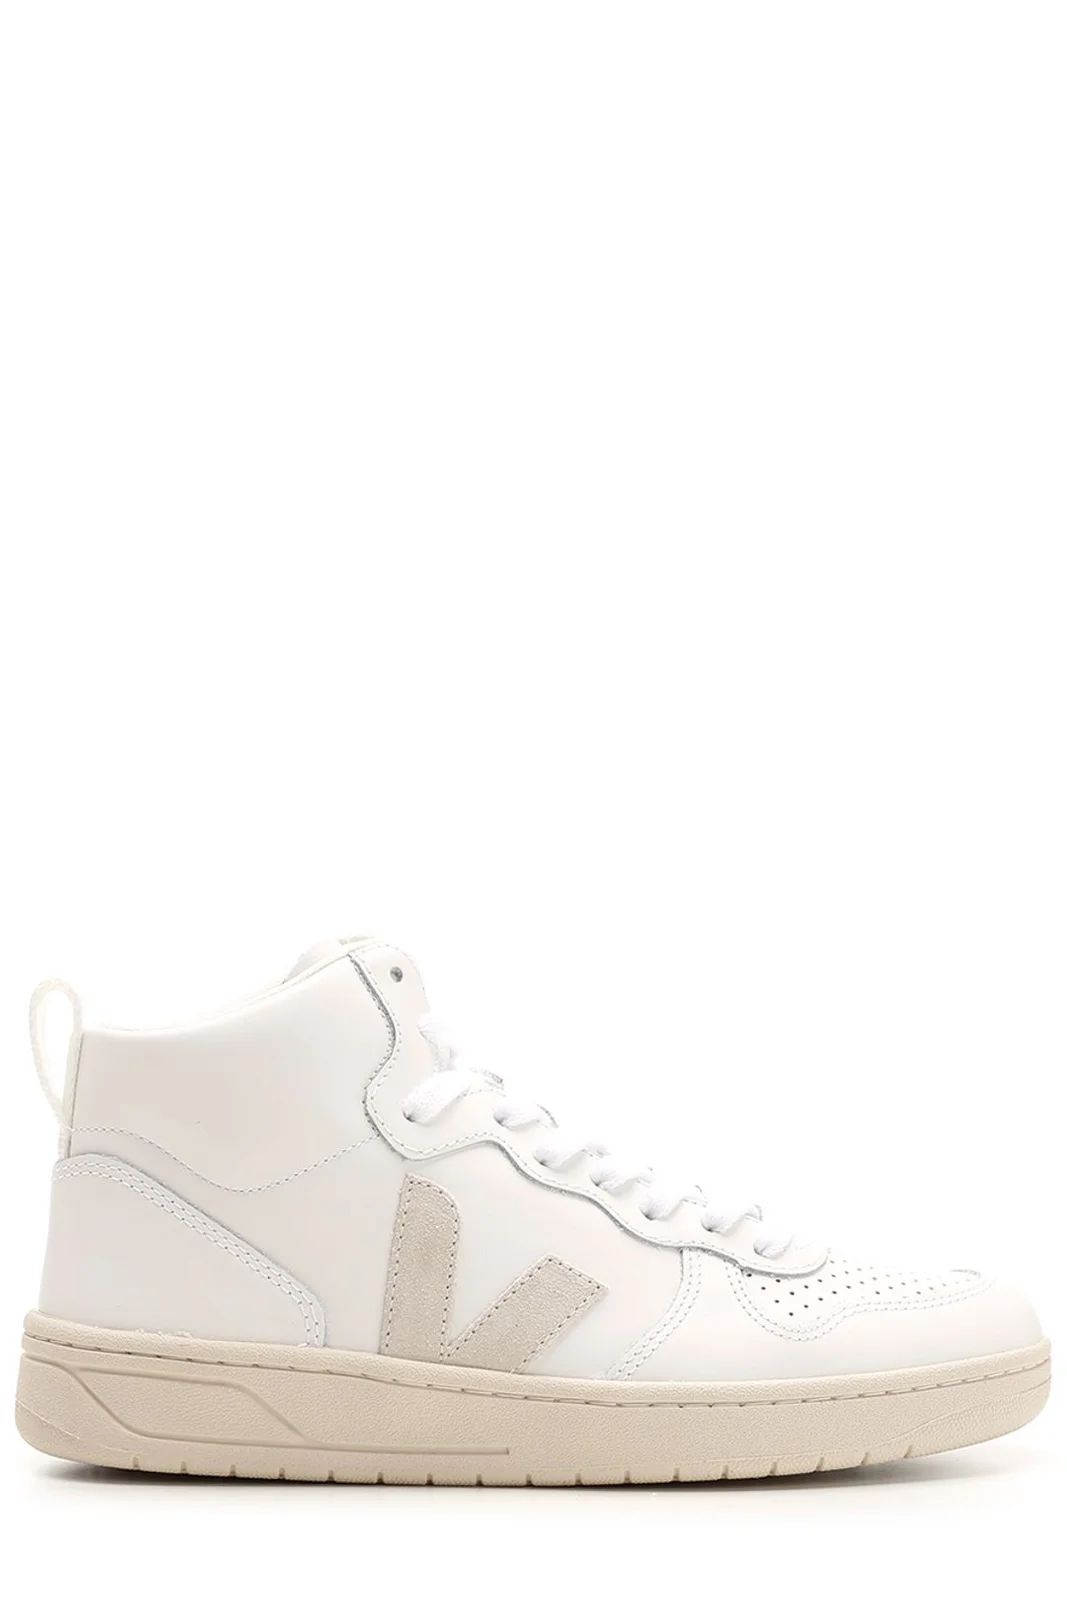 Veja V-15 High-Top Lace-Up Sneakers | Cettire Global